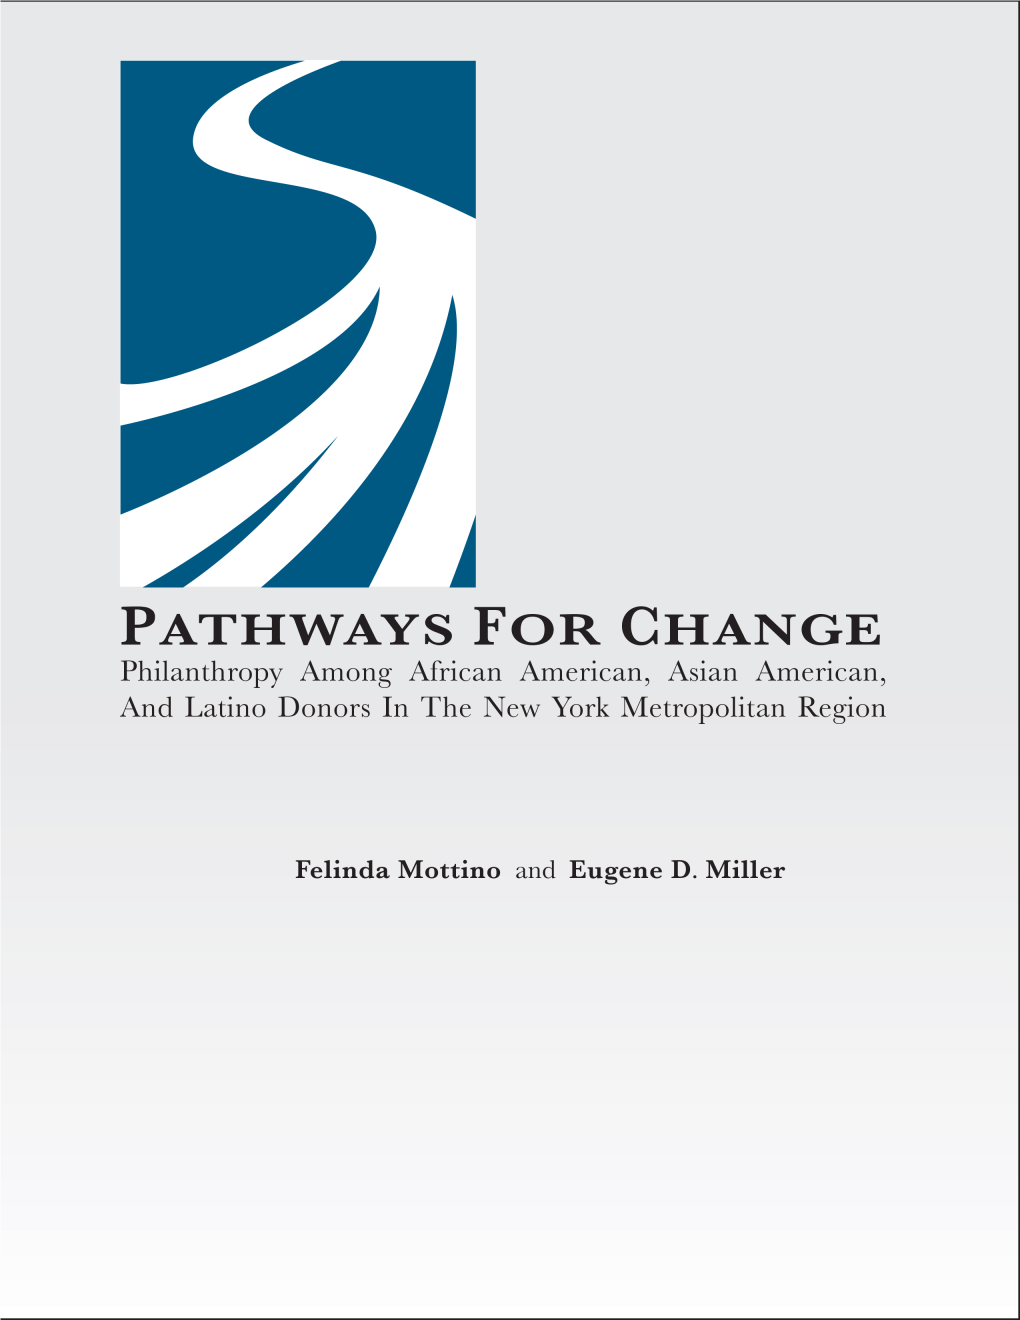 PATHWAYS for CHANGE Philanthropy Among African American, Asian American, and Latino Donors in the New York Metropolitan Region